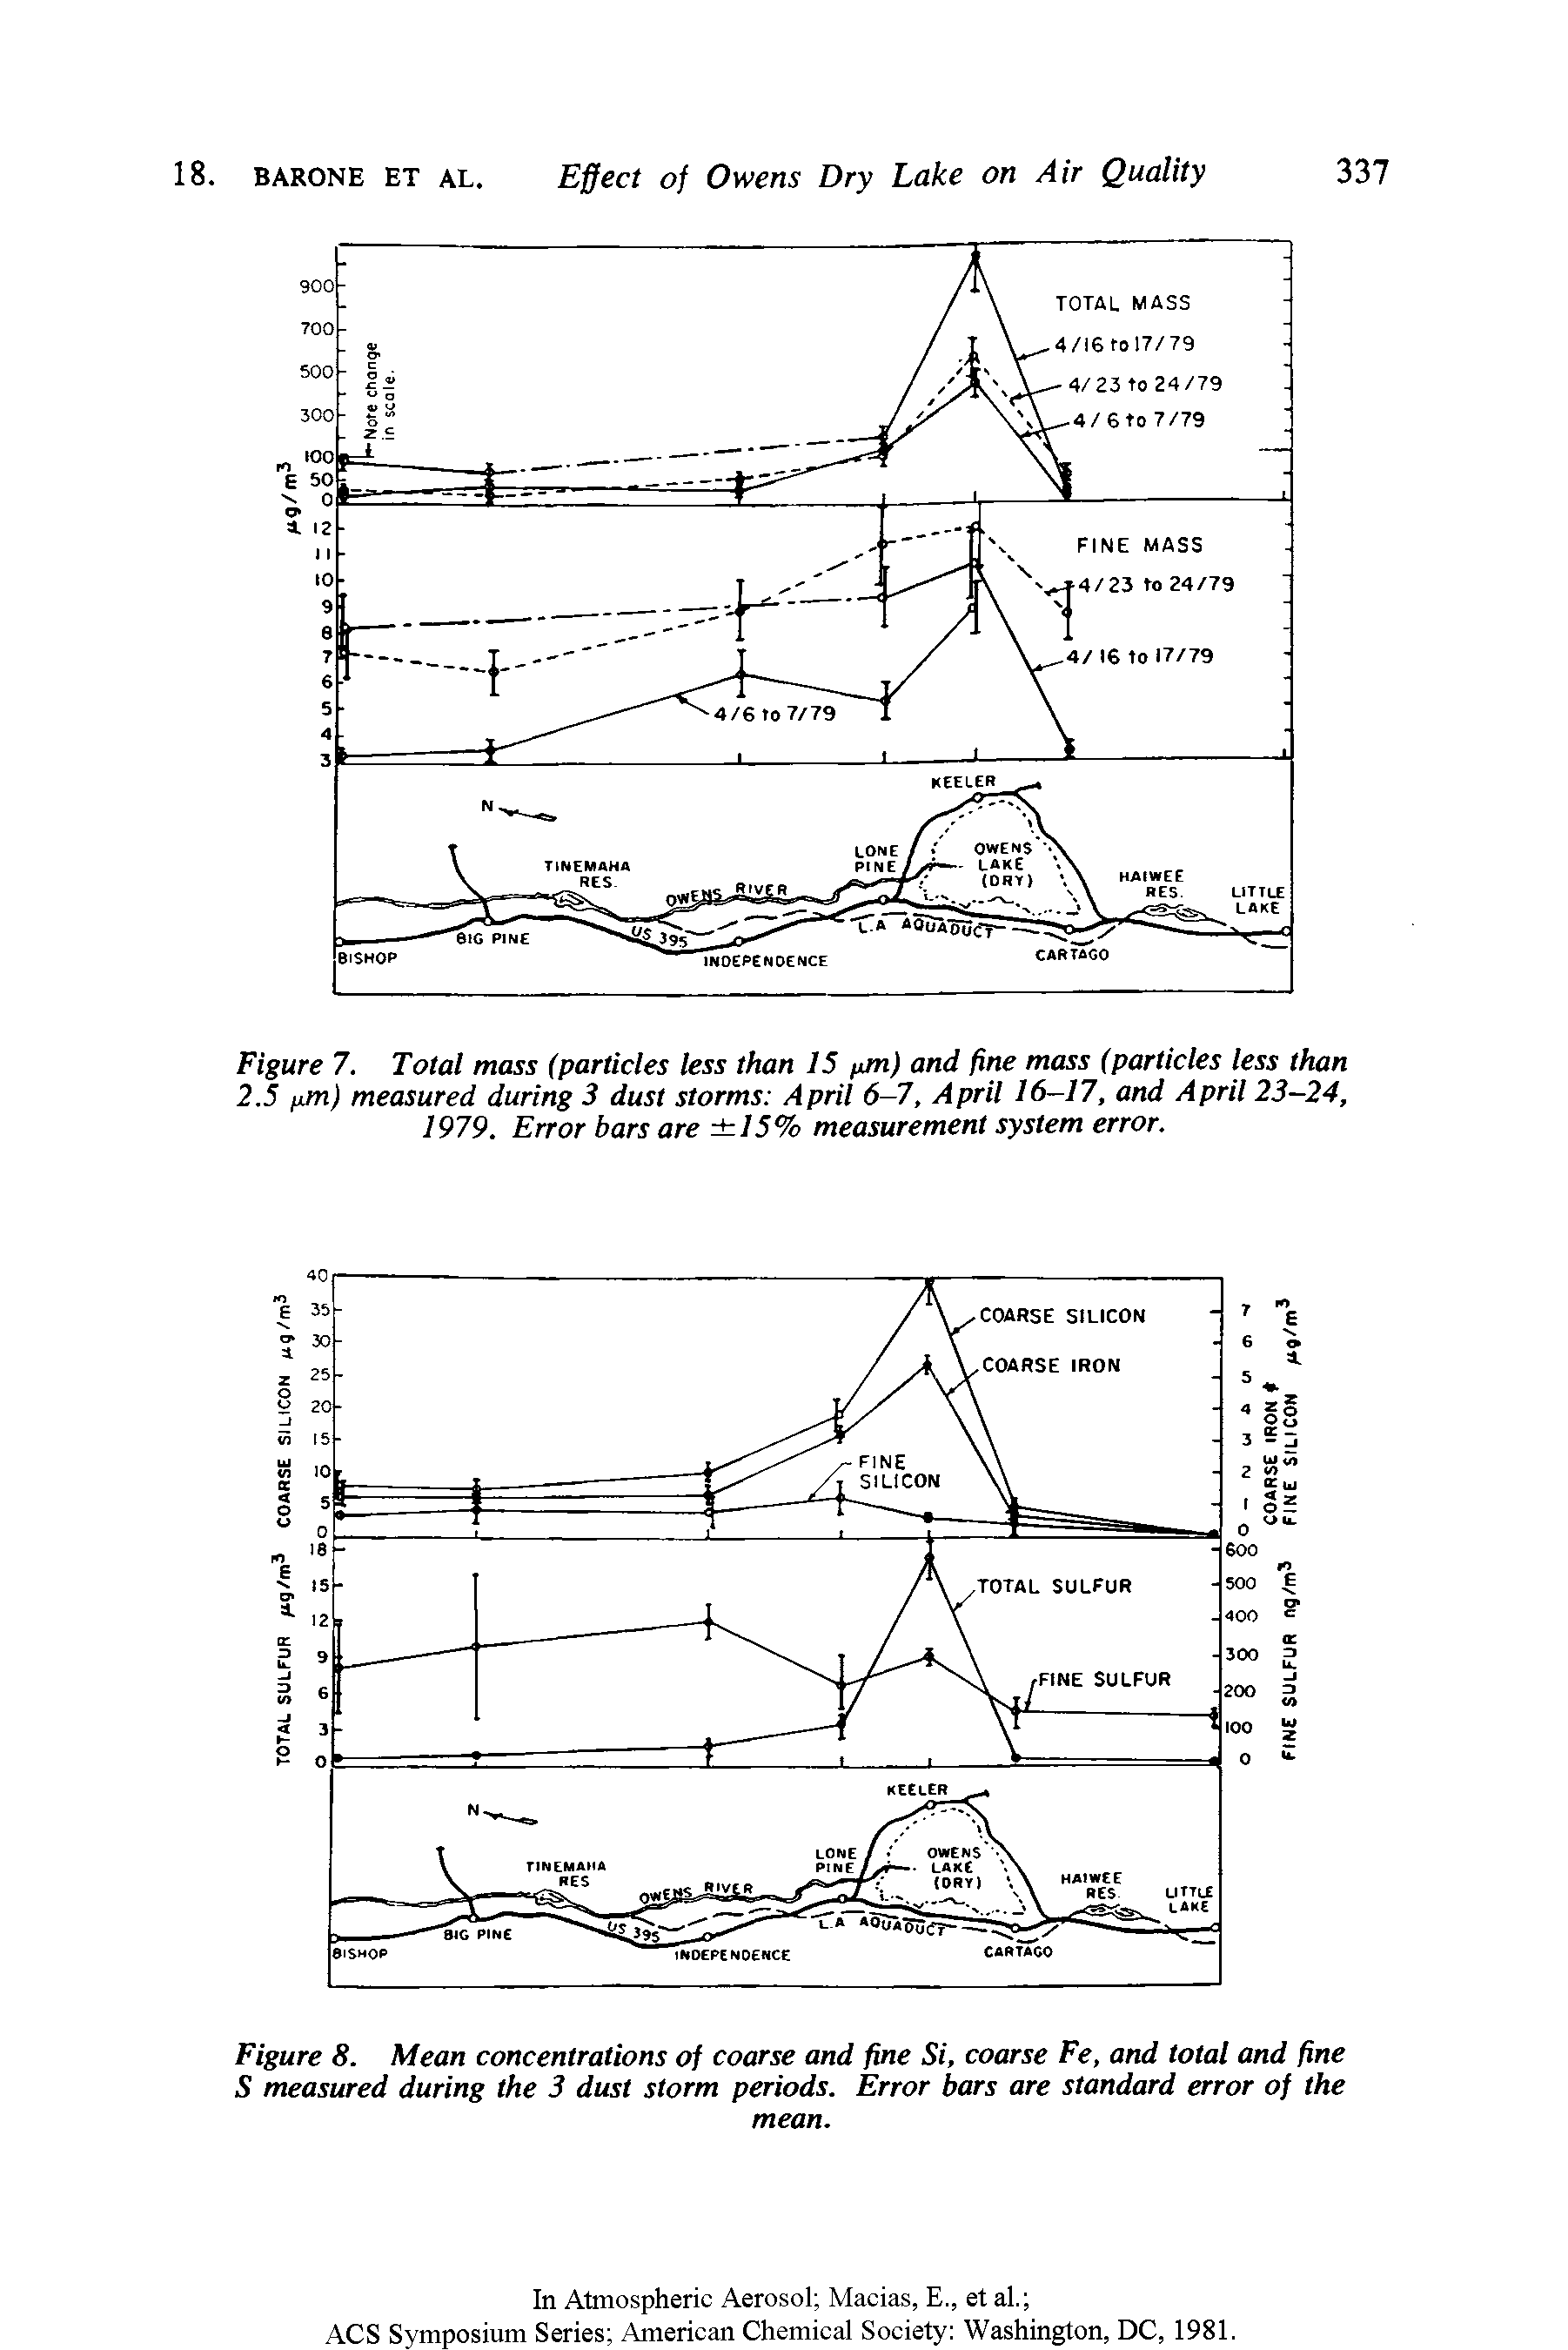 Figure 7. Total mass (particles less than 15 fUn) and fine mass (particles less than 2.5 fjm) measured during 3 dust storms April 6-7, April 16-17, and April 23-24, 1979. Error bars are 15% measurement system error.